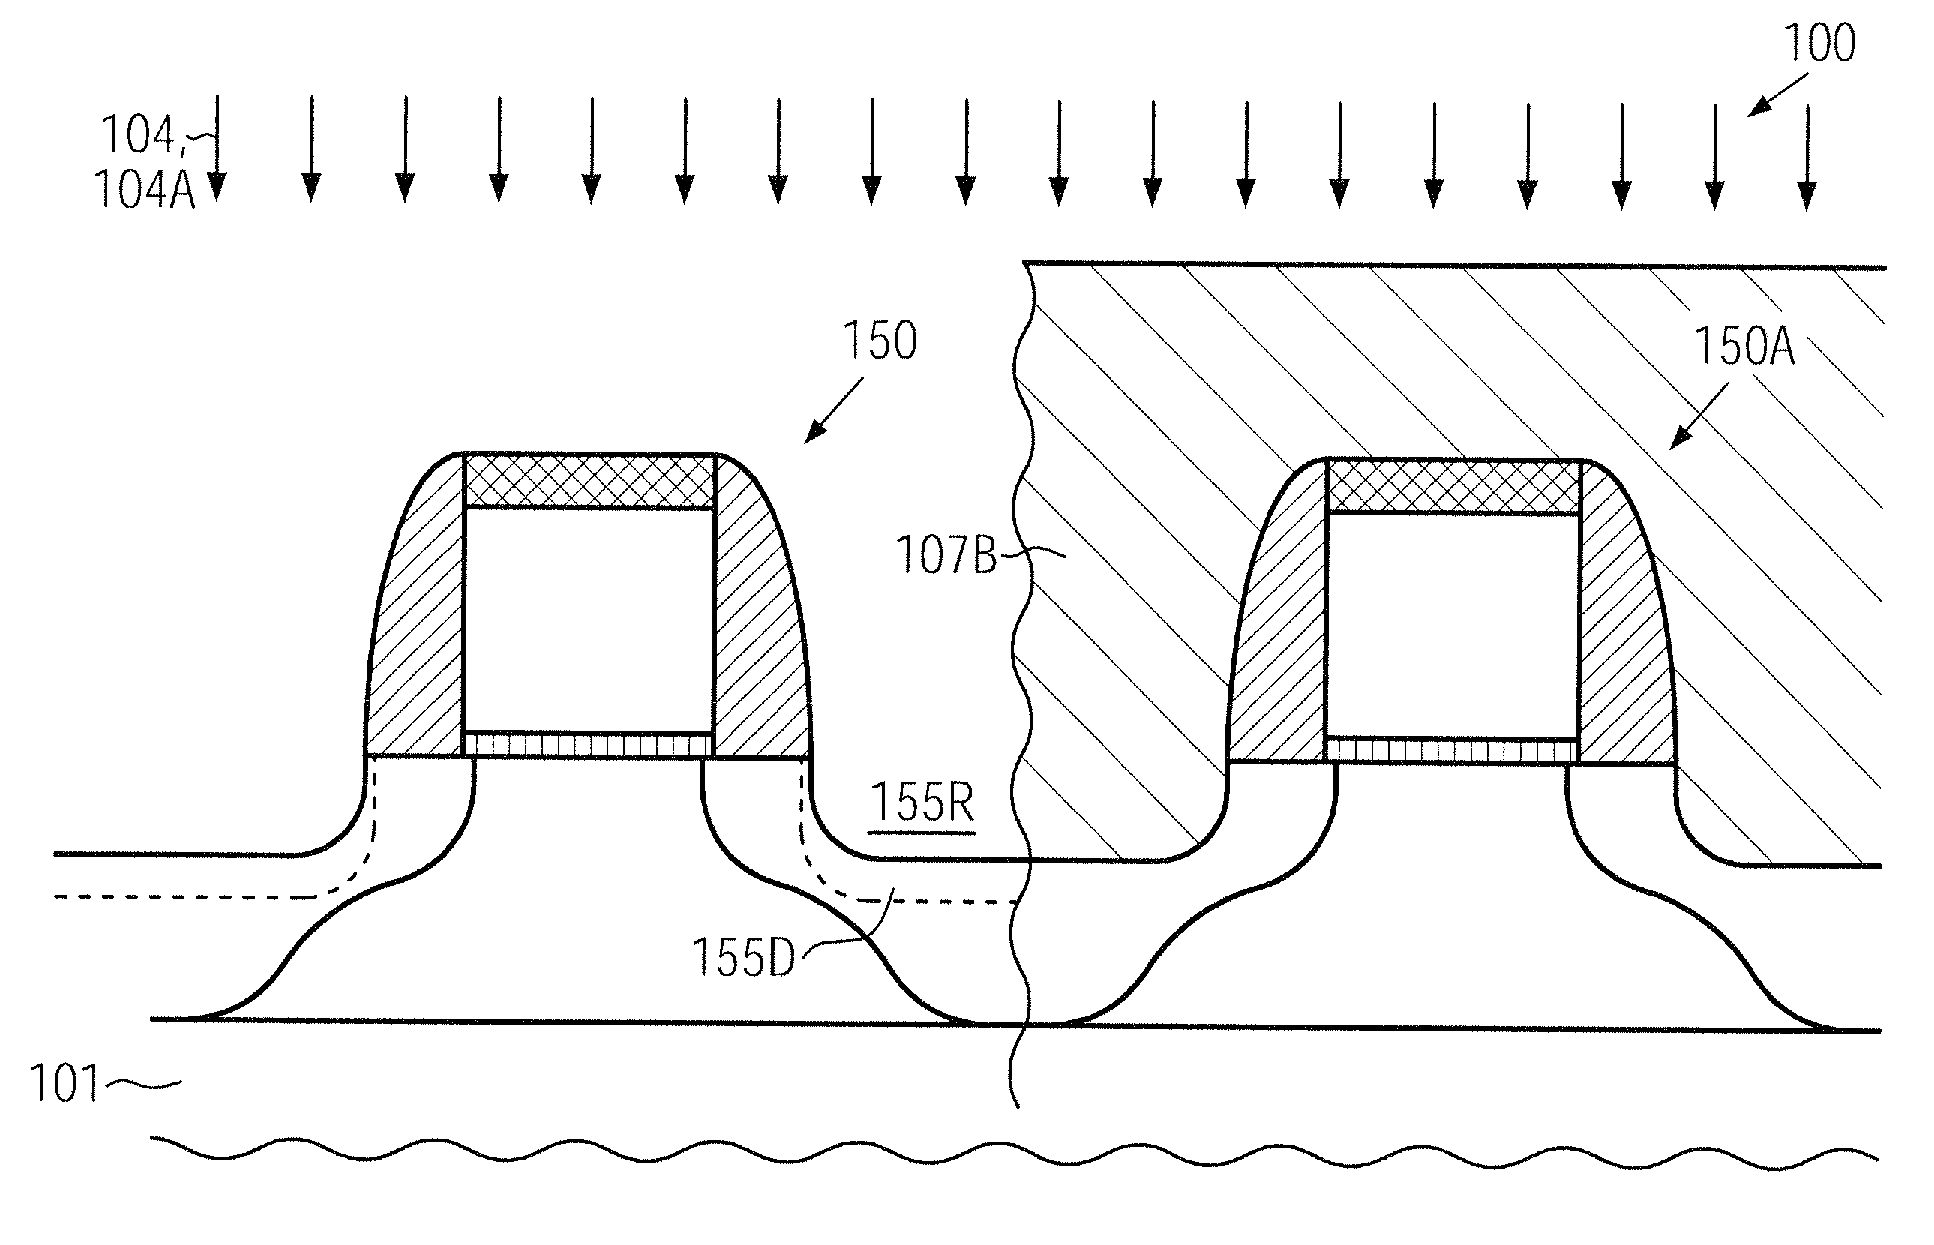 CMOS device comprising mos transistors with recessed drain and source areas and non-conformal metal silicide regions